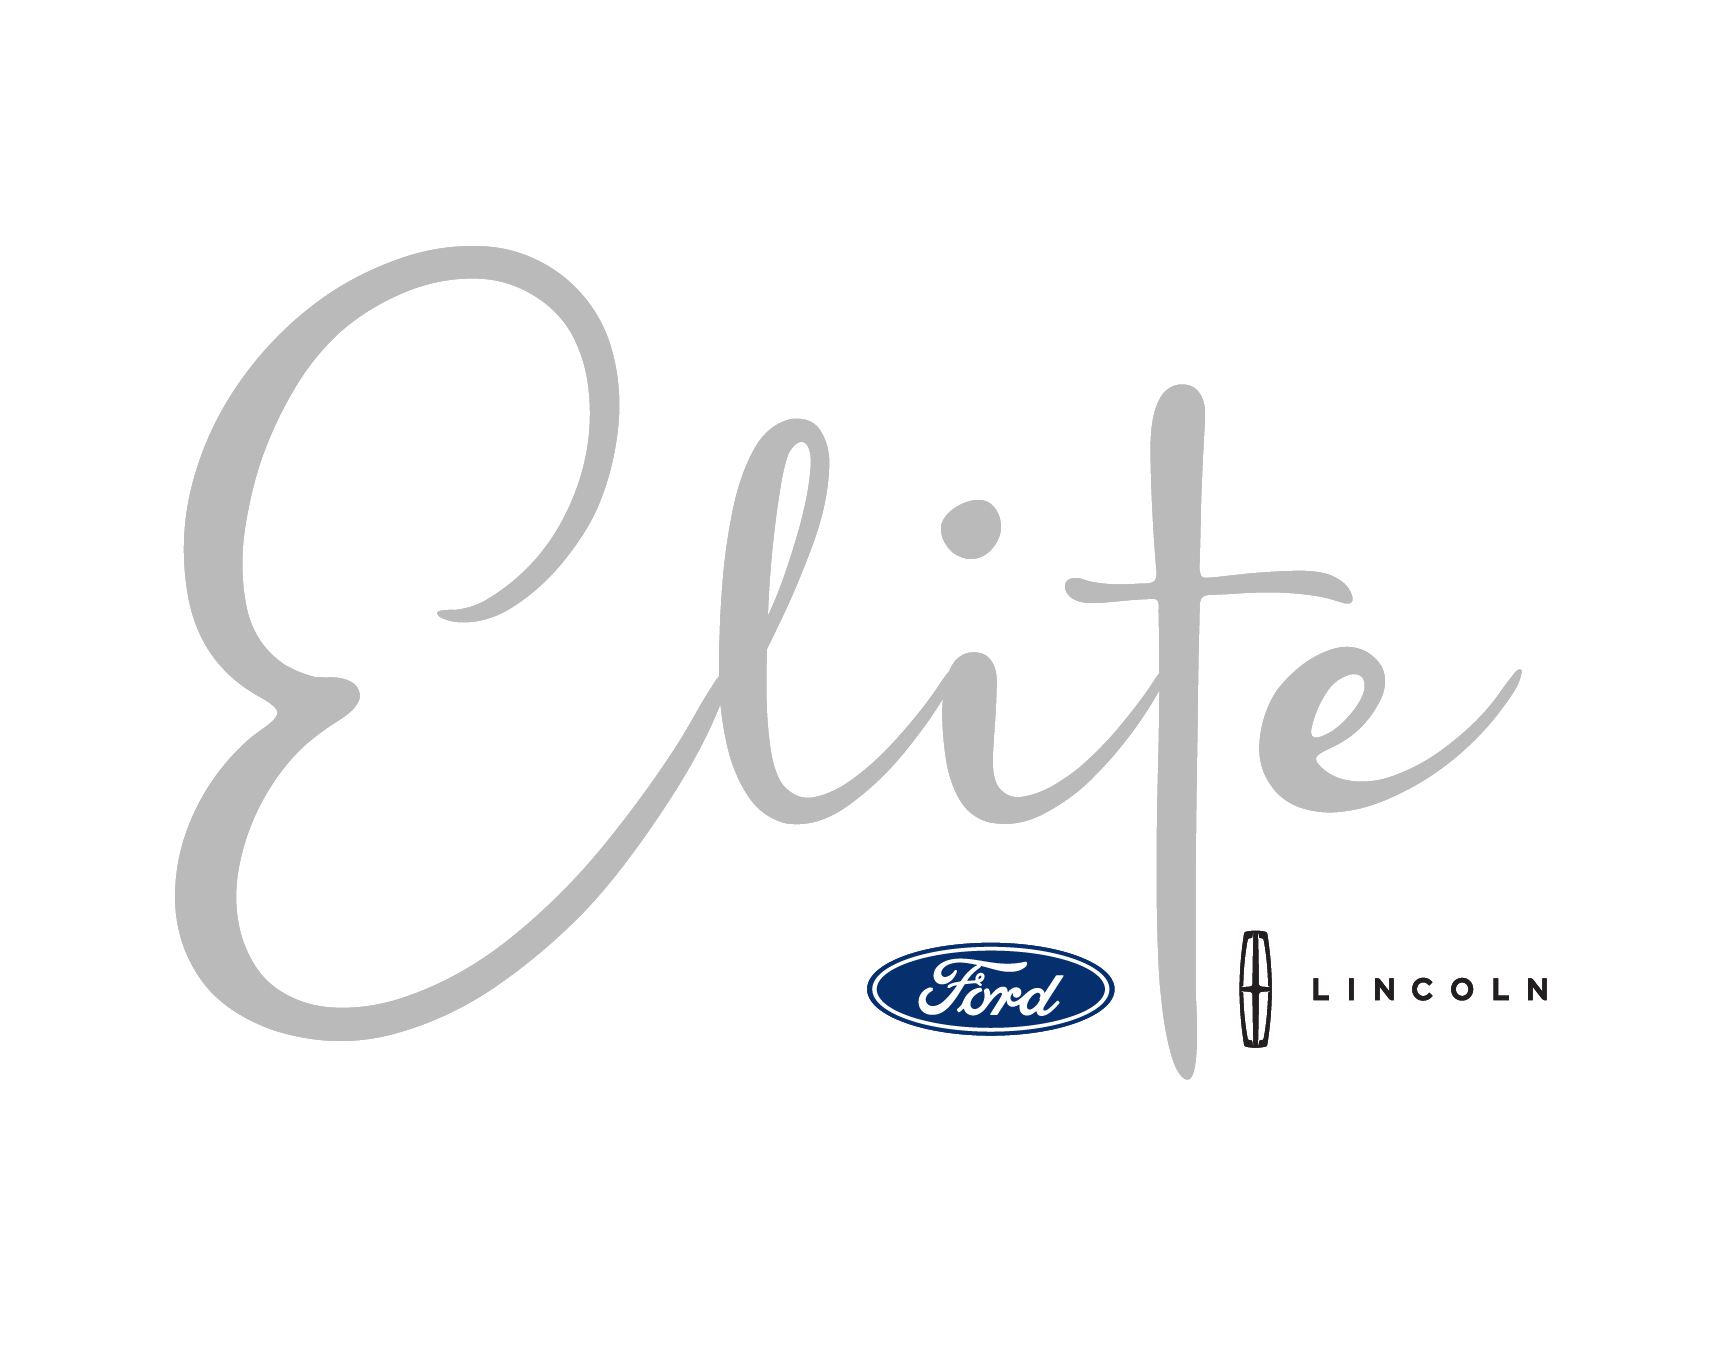 One Ford Elite